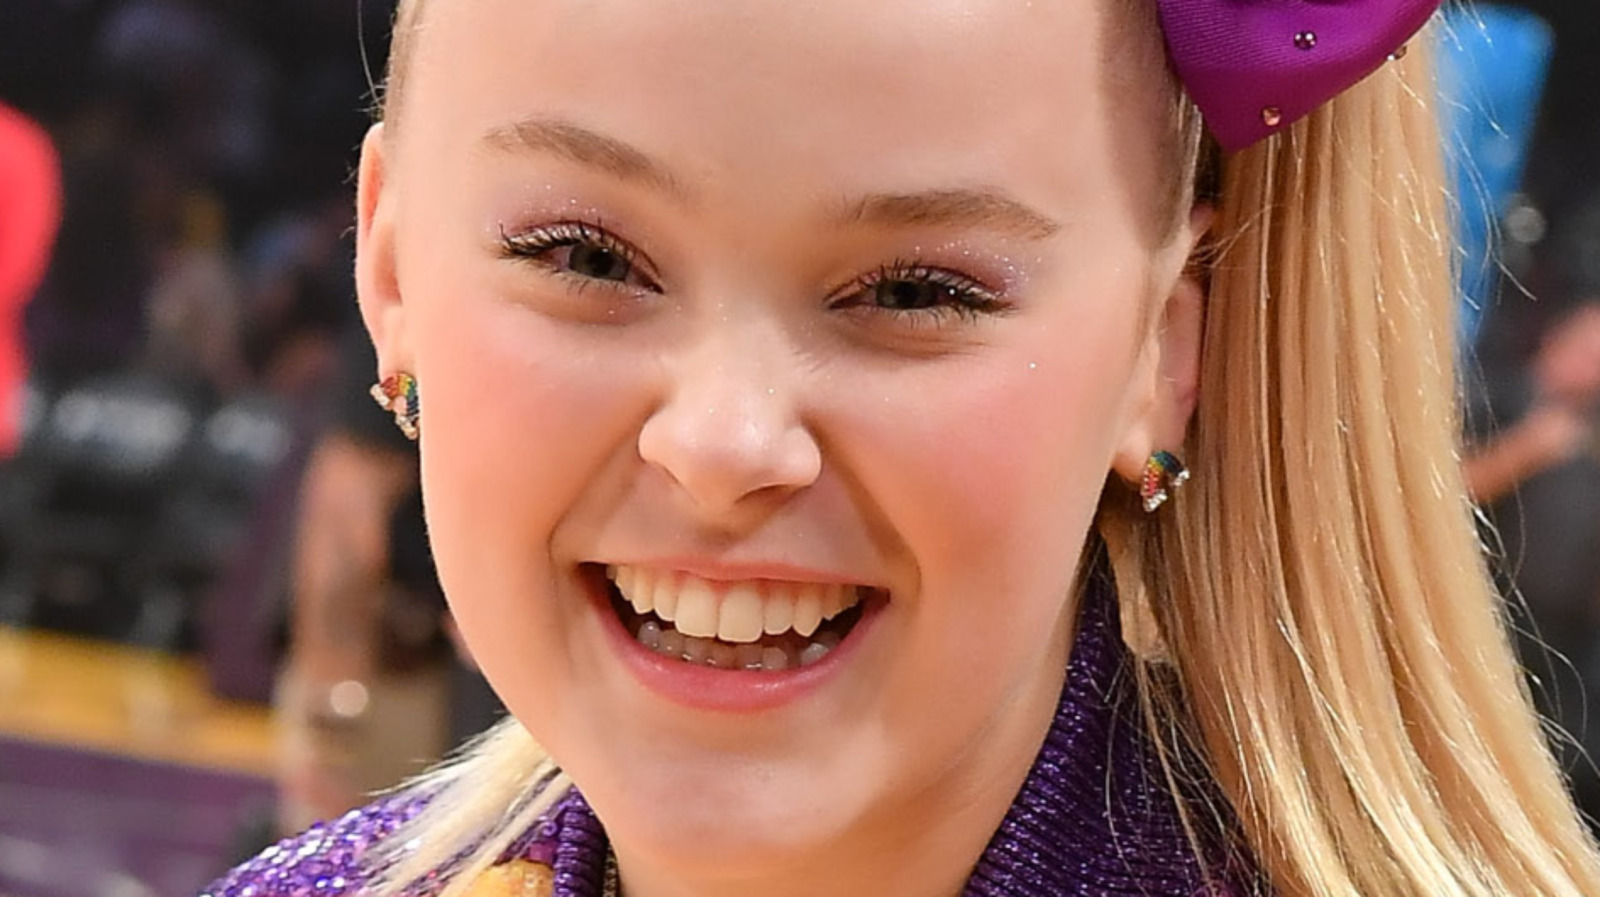 Teen sensation JoJo Siwa is known for her bubbly personality, but the forme...